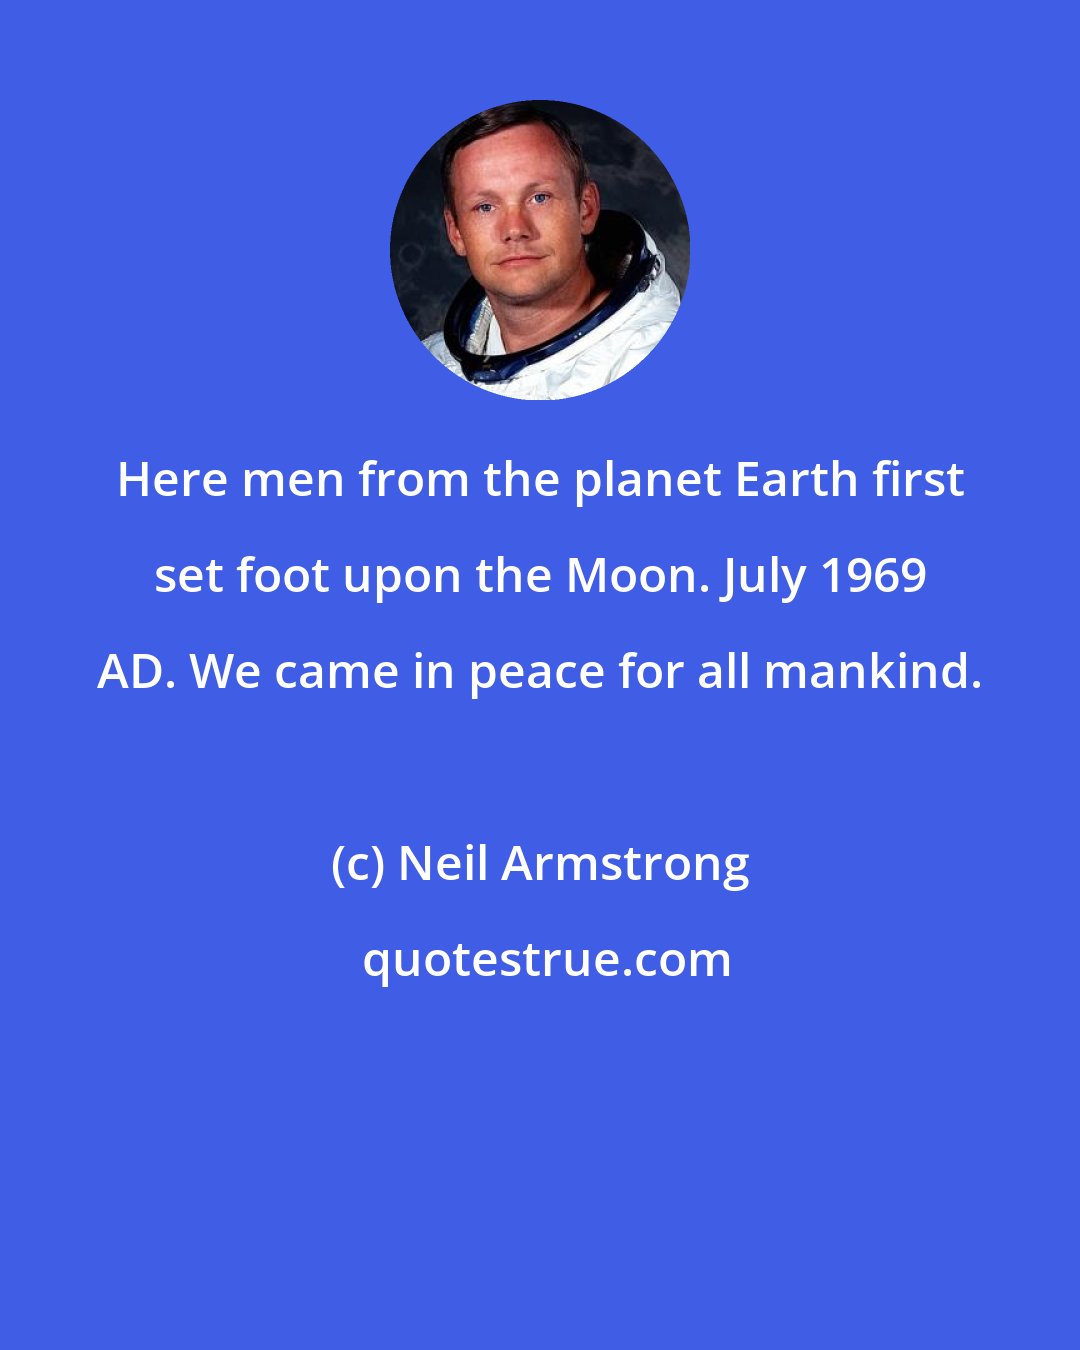 Neil Armstrong: Here men from the planet Earth first set foot upon the Moon. July 1969 AD. We came in peace for all mankind.